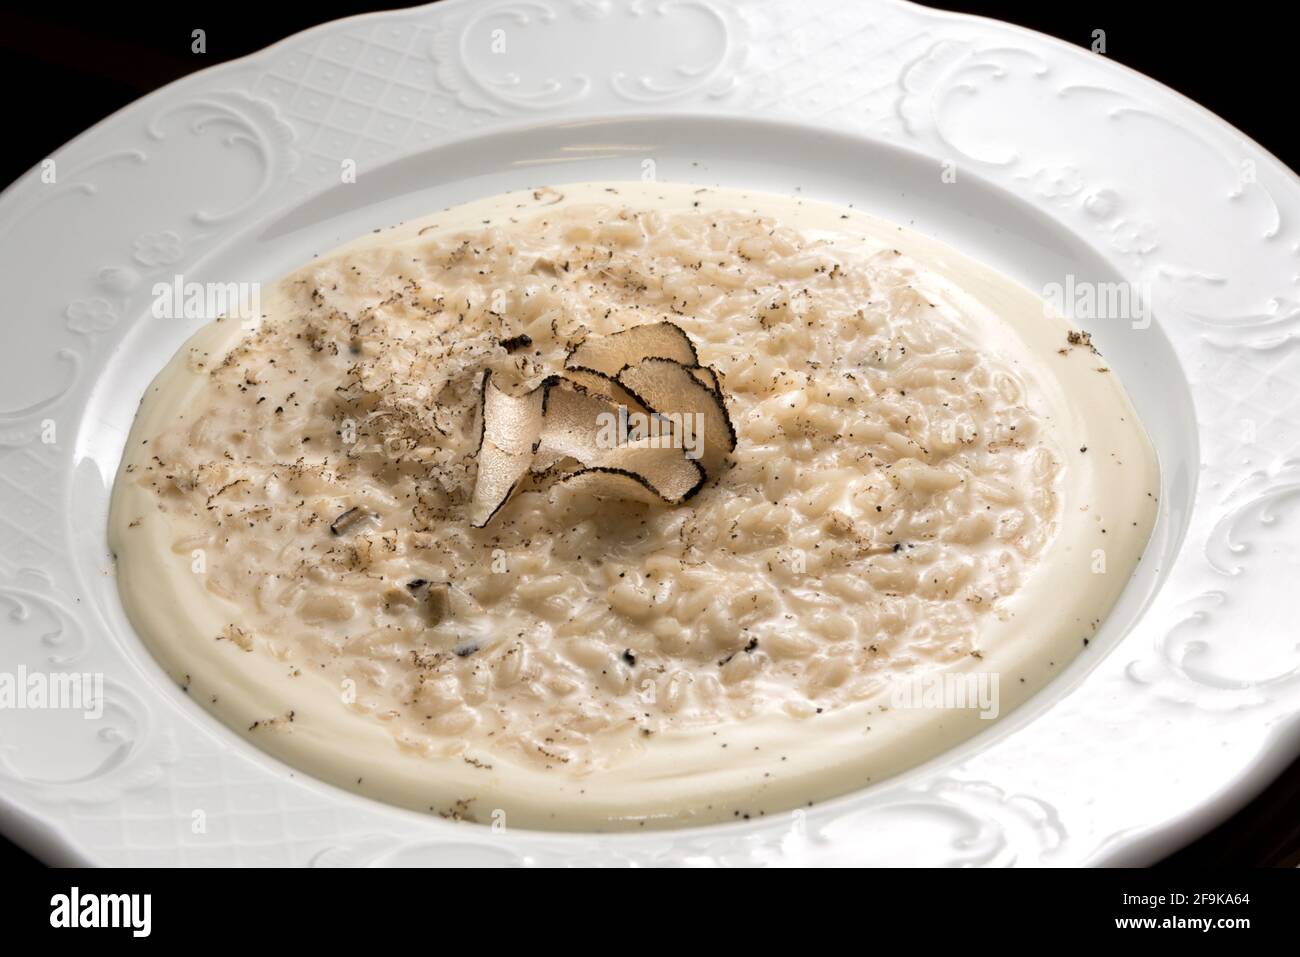 Creamy cheese risotto with slices of truffle, in white dish, close up Stock Photo